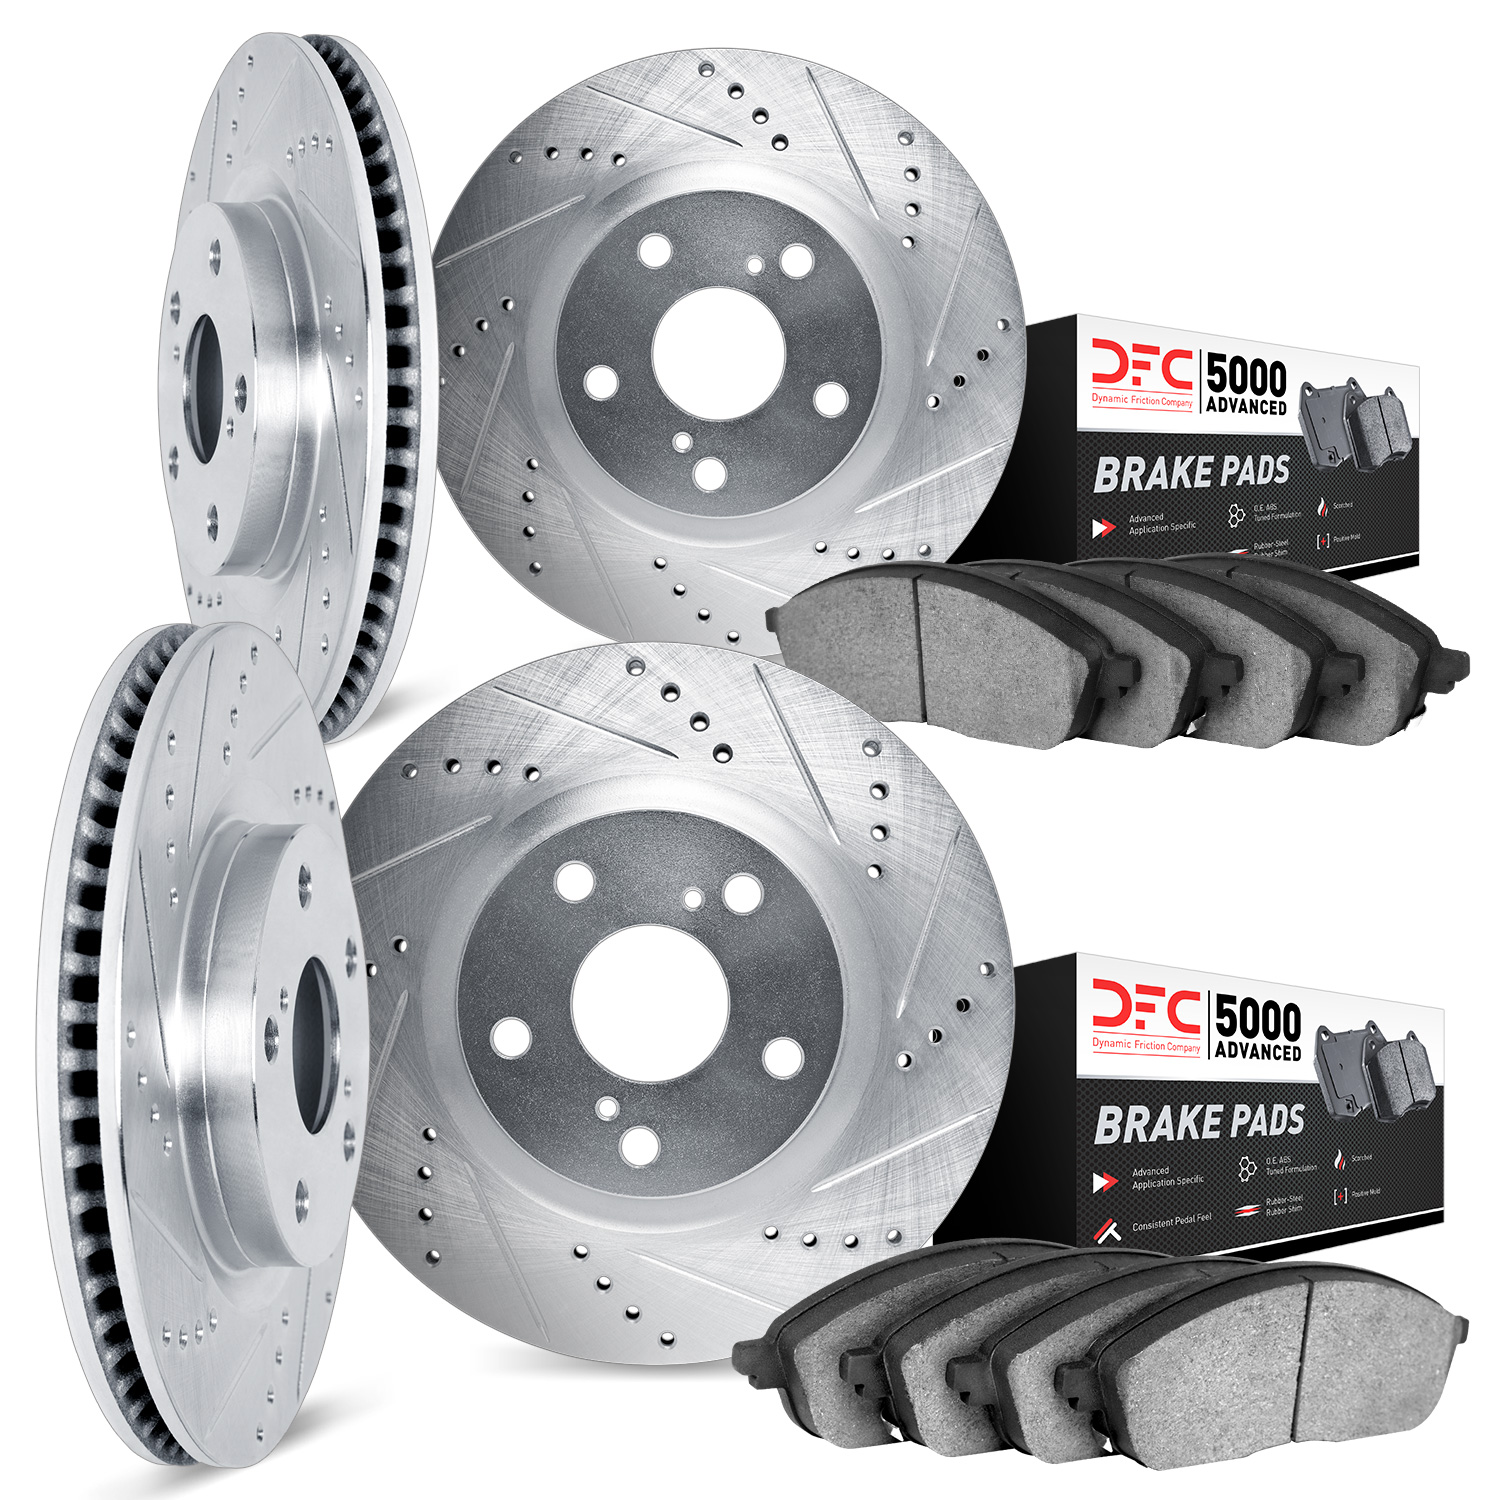 7504-13010 Drilled/Slotted Brake Rotors w/5000 Advanced Brake Pads Kit [Silver], 2010-2014 Subaru, Position: Front and Rear